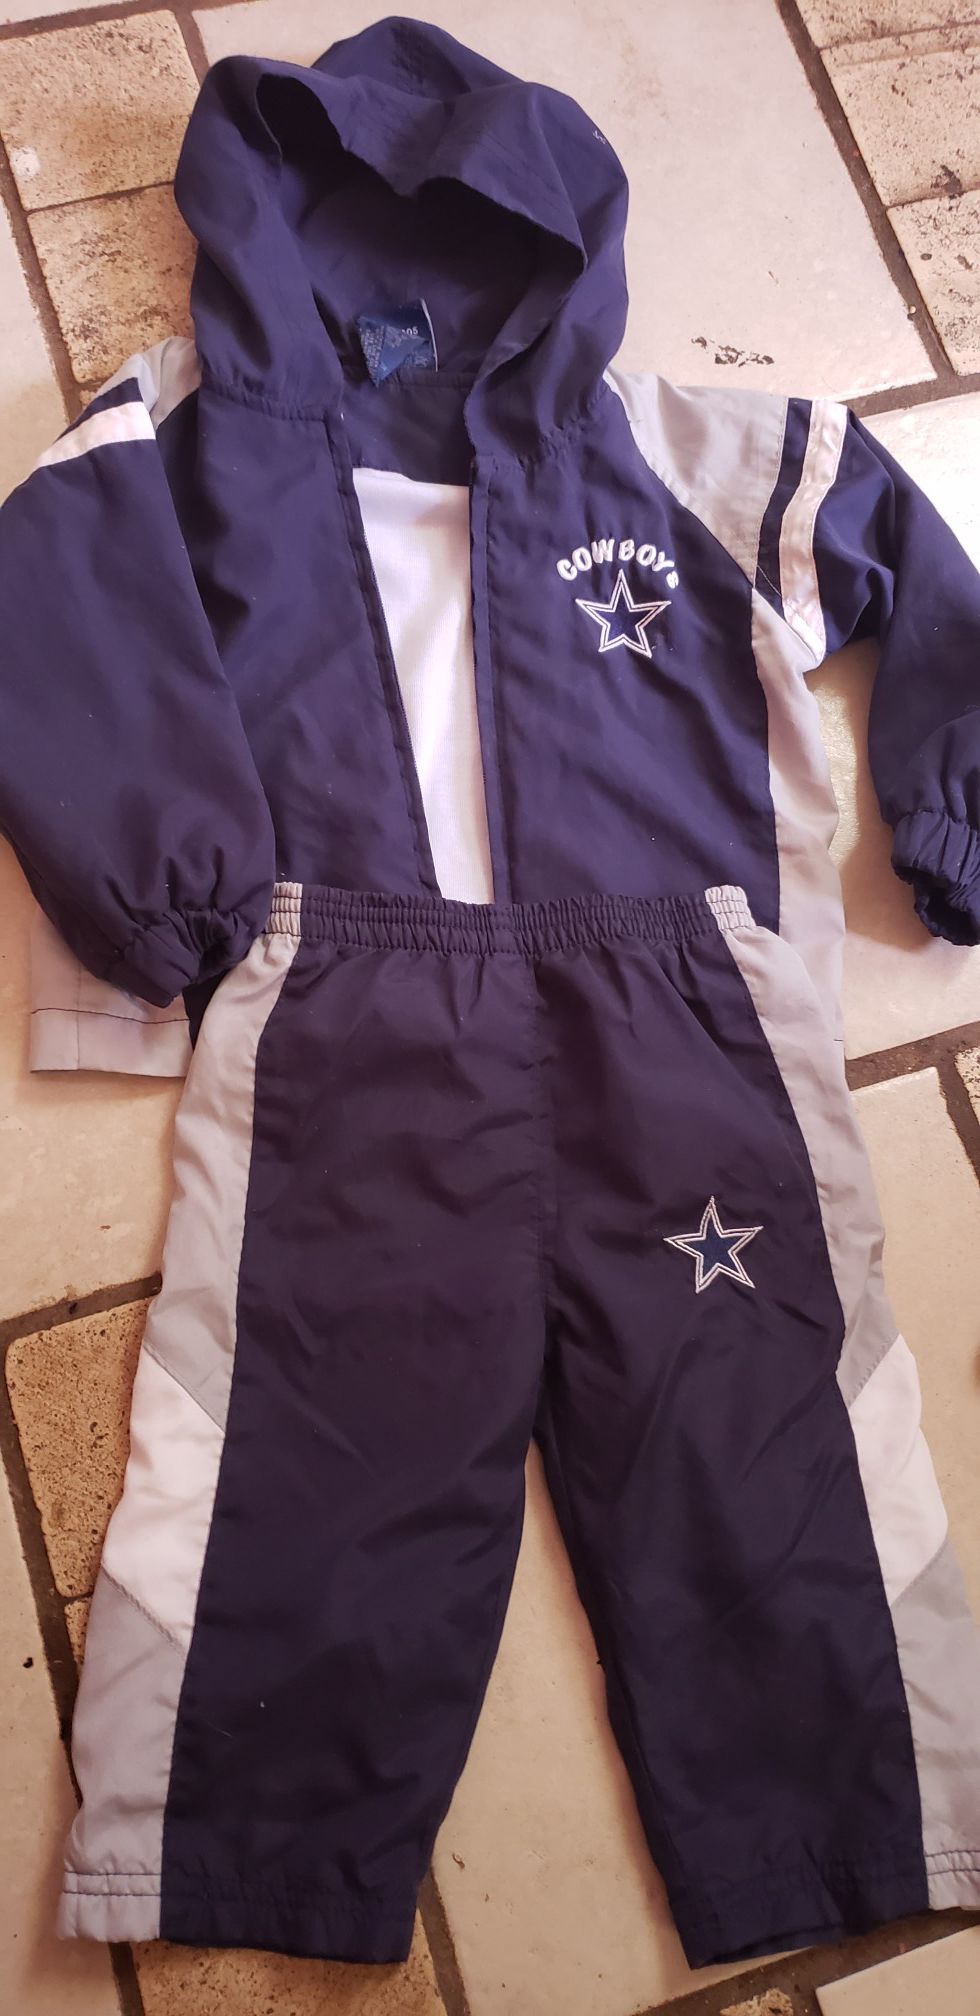 Cowboys outfit